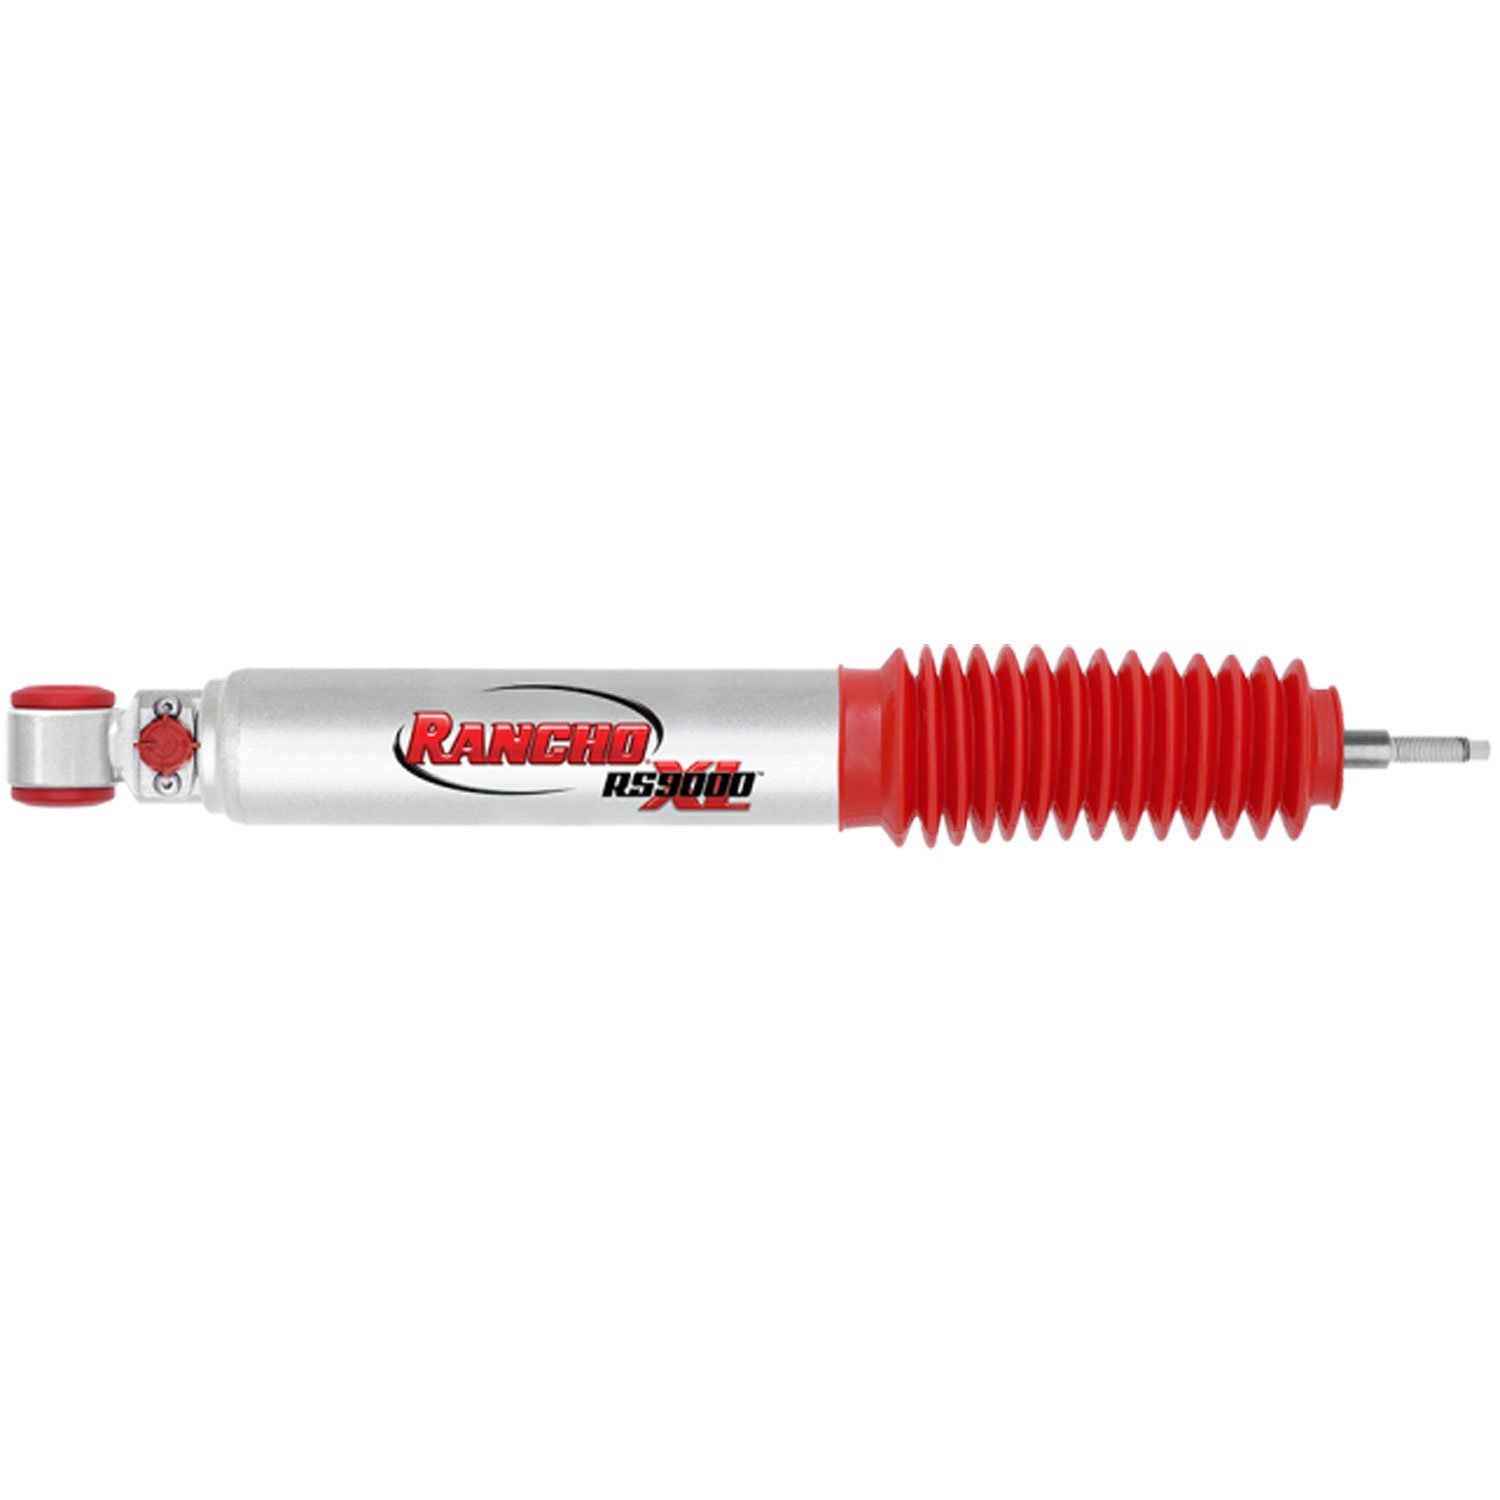 RS9000XL Rear Shock Absorber Fits Dodge, Ford, International and Toyota SUVs and Pickups